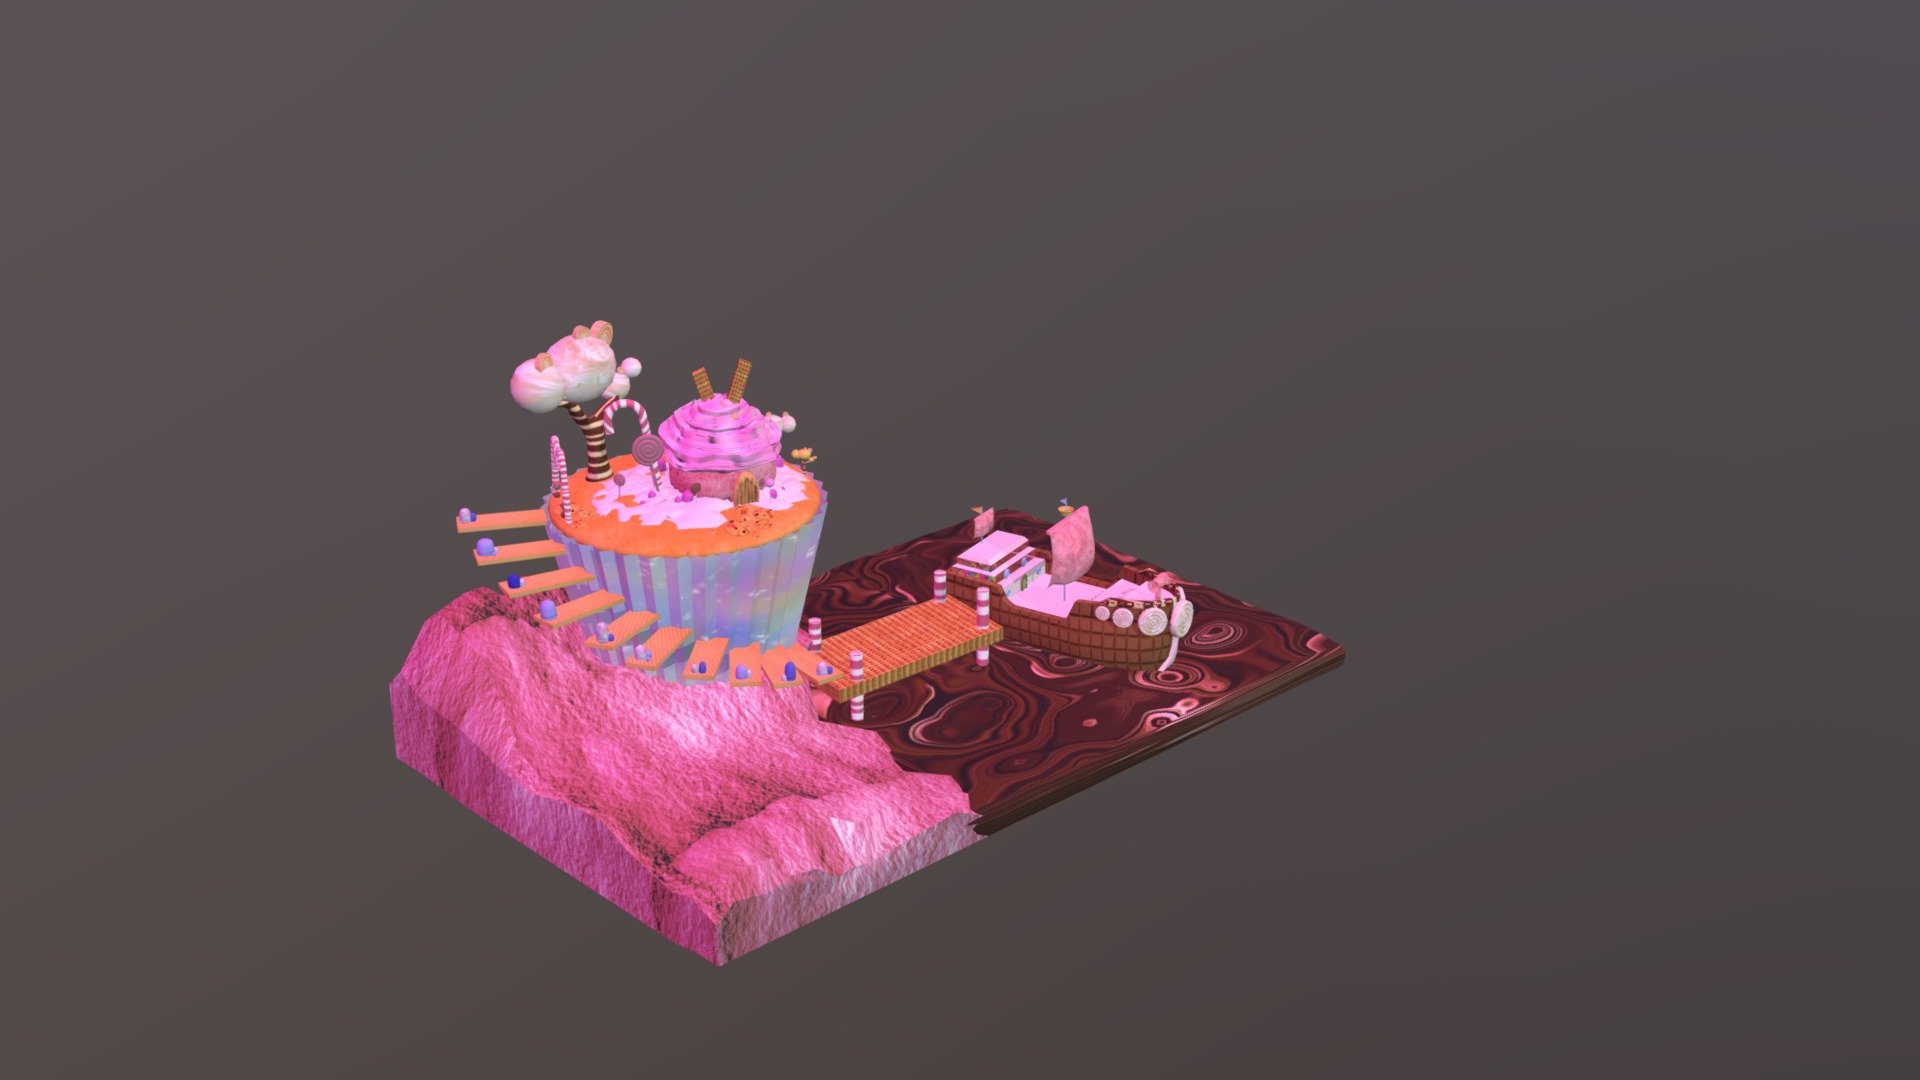 yay! candyland for your joy, happiness and make your day! - Mancha - 3D model by mancha_UAS 3d model